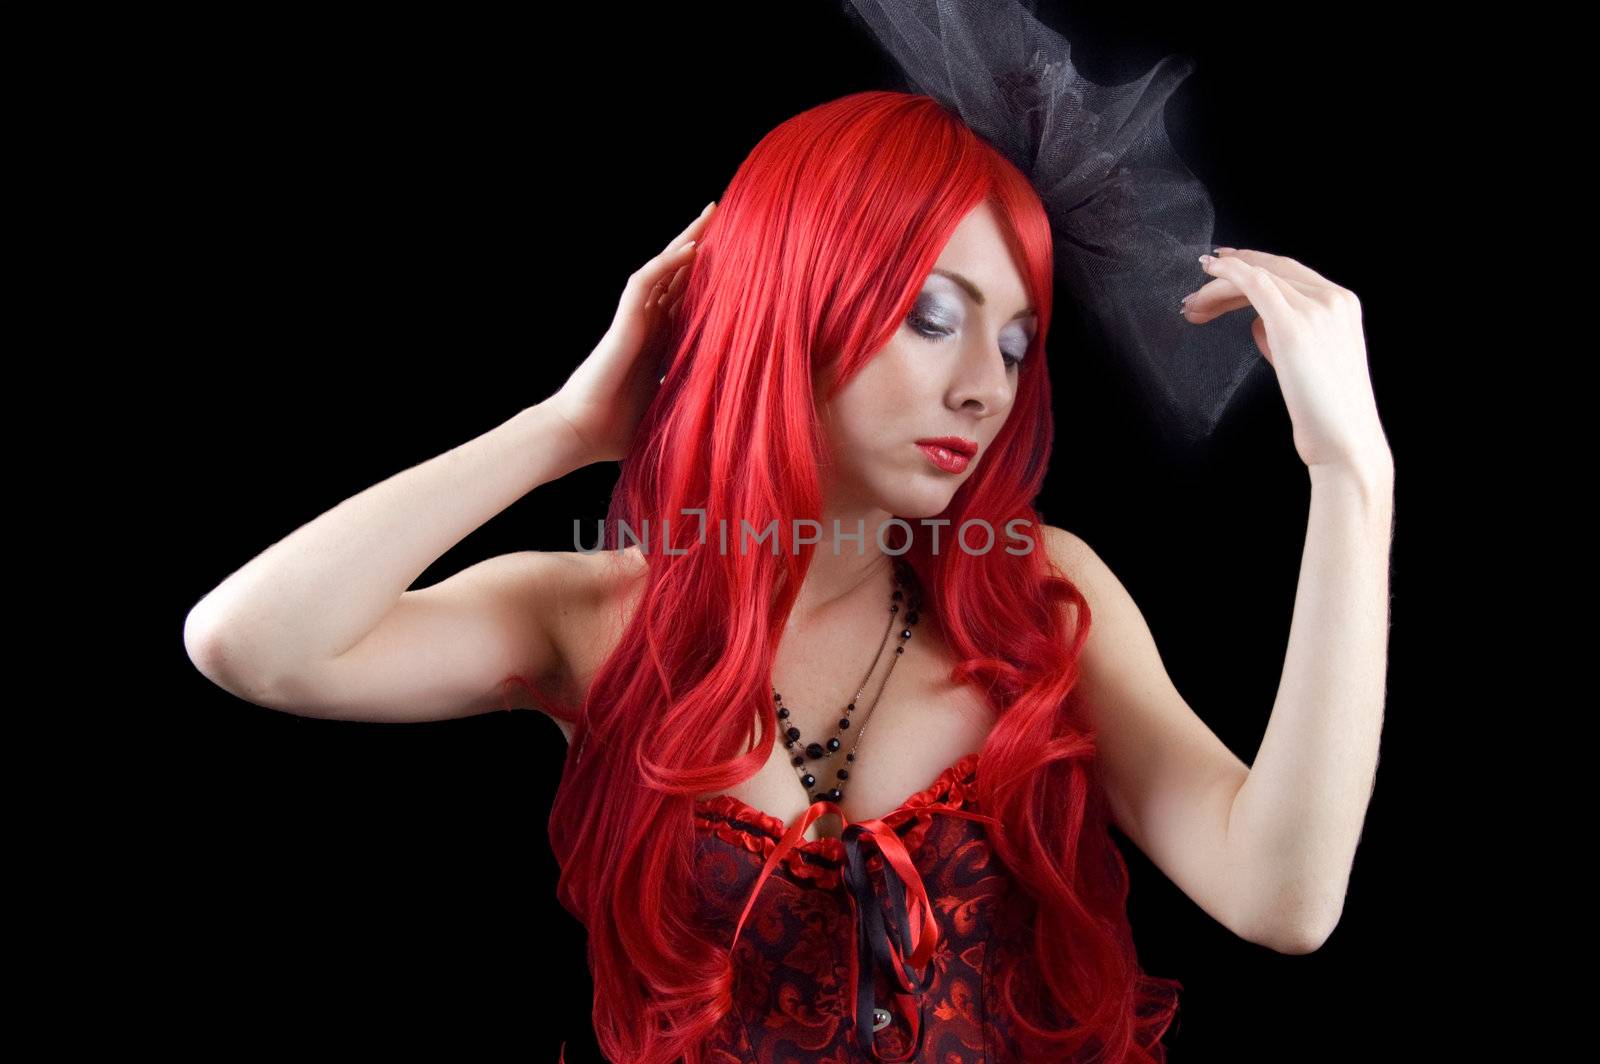 Gothic woman with red hair by Angel_a